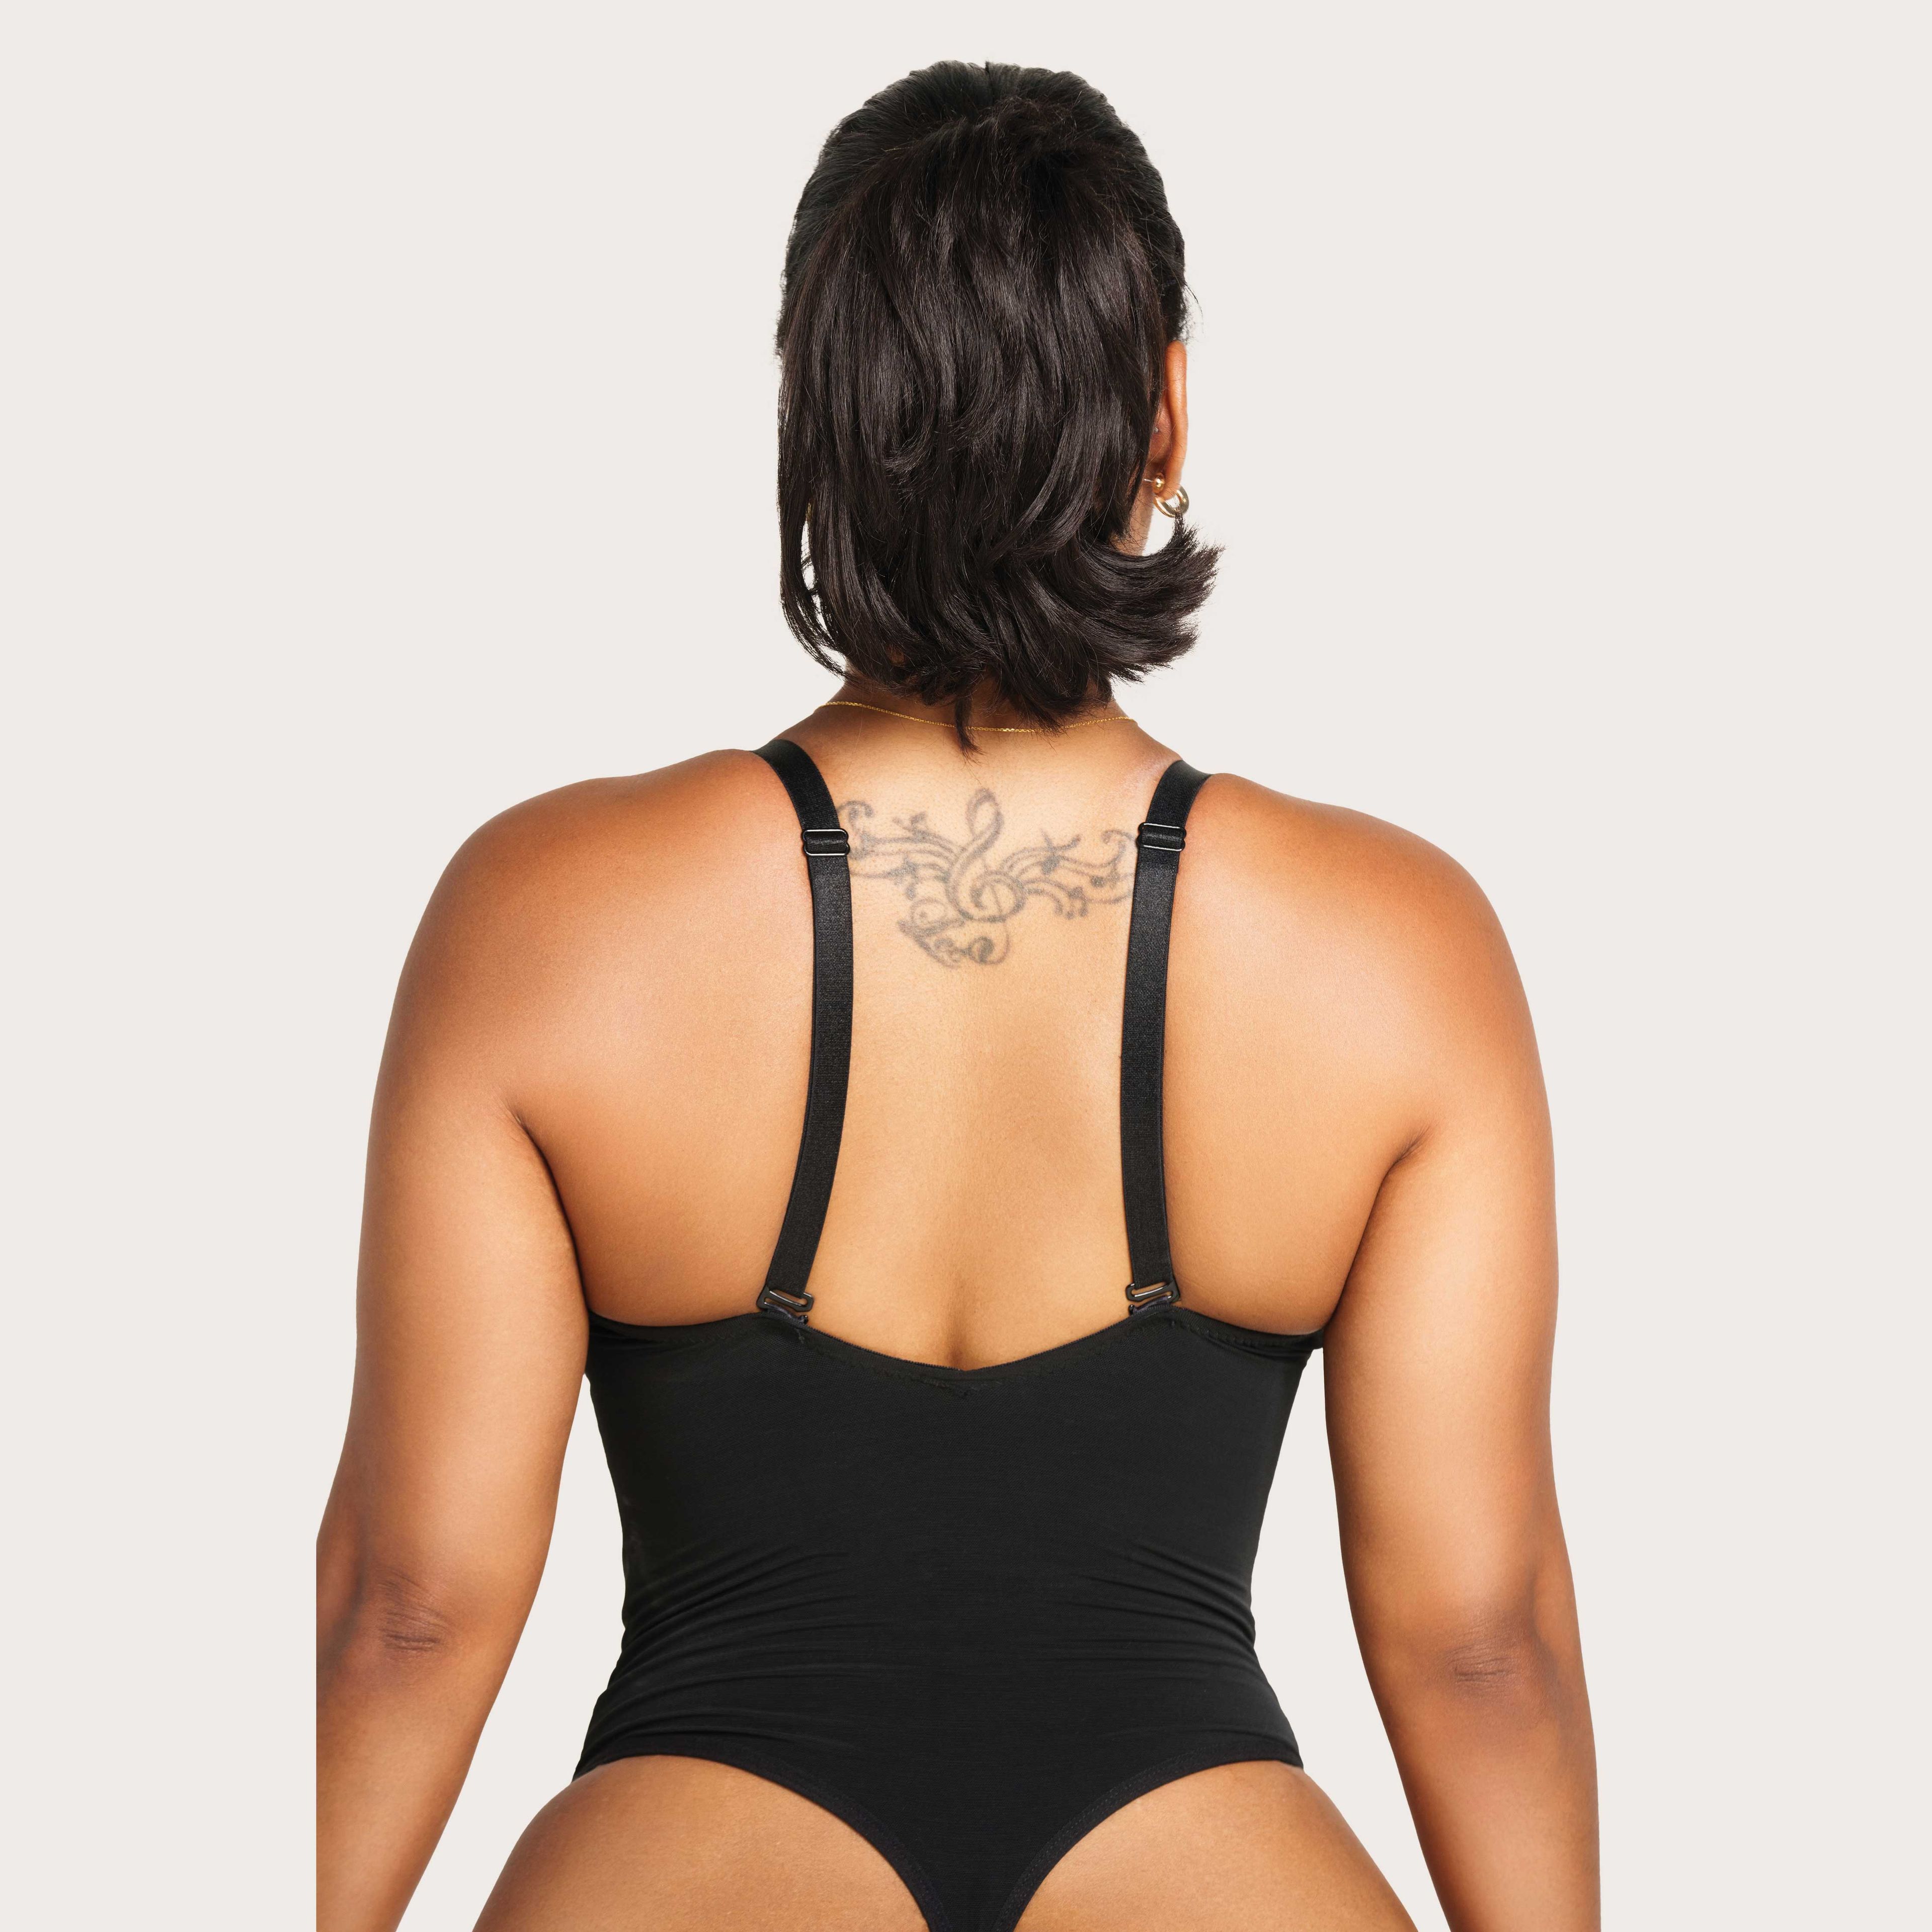 https://cdn.prod.marmalade.co/products/3840x3840/filters:quality(80)/www.jsculptfitness.com%2Fproducts%2Fv-plung-sculpting-bodysuit%2F1665677829%2FCheeky-Body-Suite-3.jpg